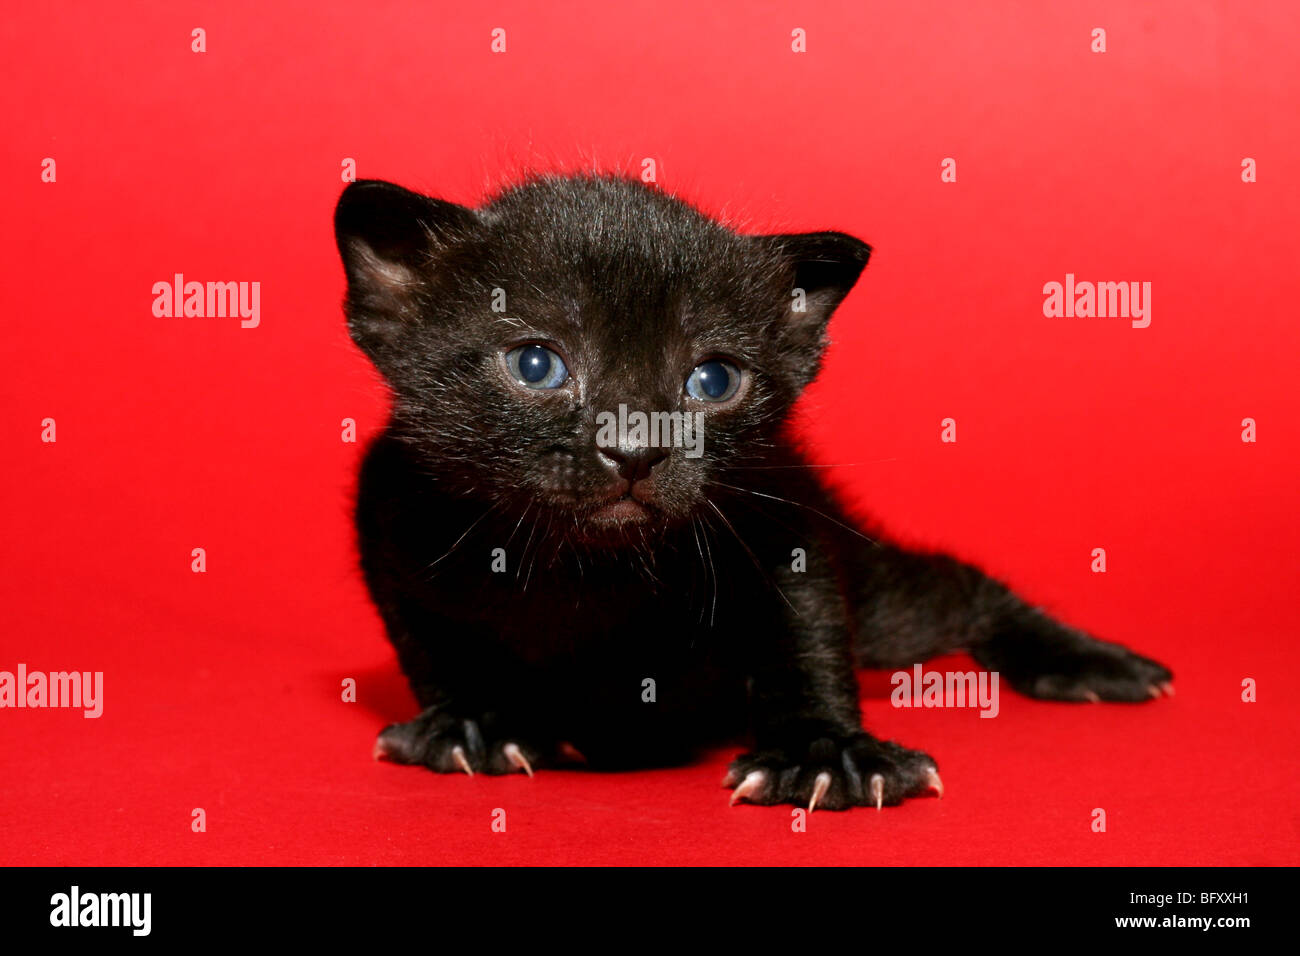 one week old kitten on red background nails protruding Stock Photo